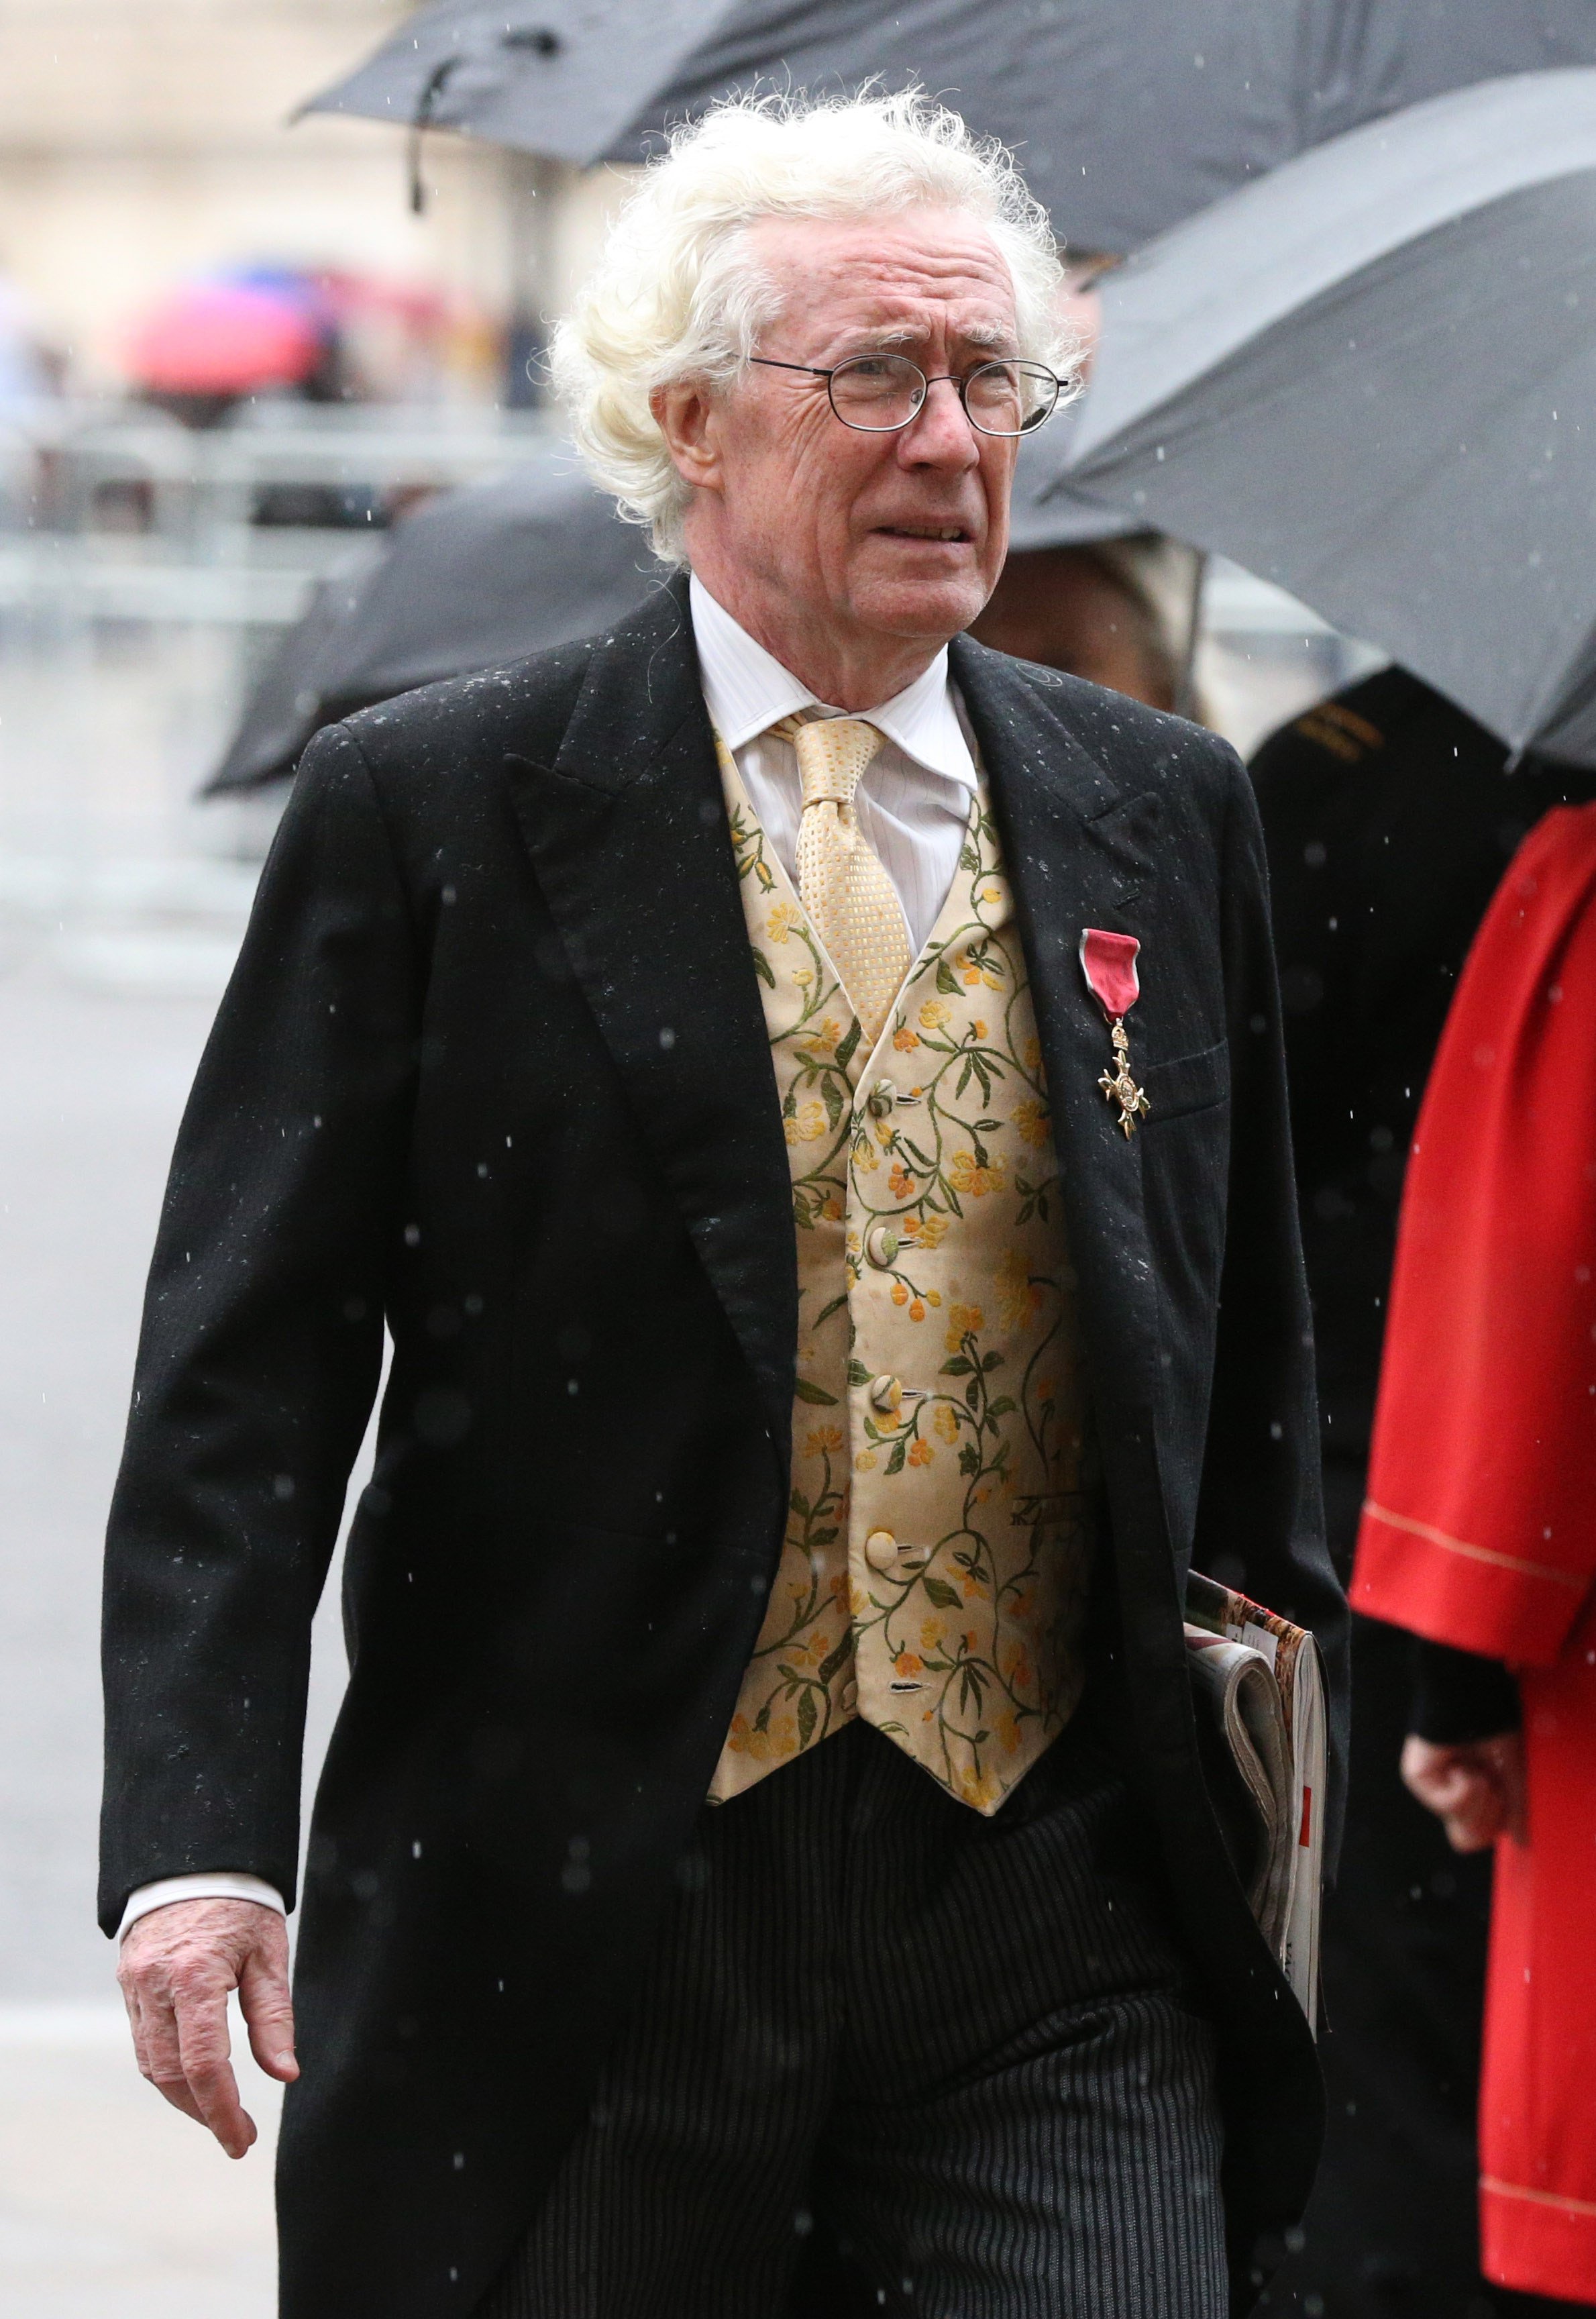 British judge Jonathan Sumption, who recently resigned from Hong Kong’s Court of Final Appeal, is seen at the Westminster Abbey in London in 2019. File photo: Getty Images